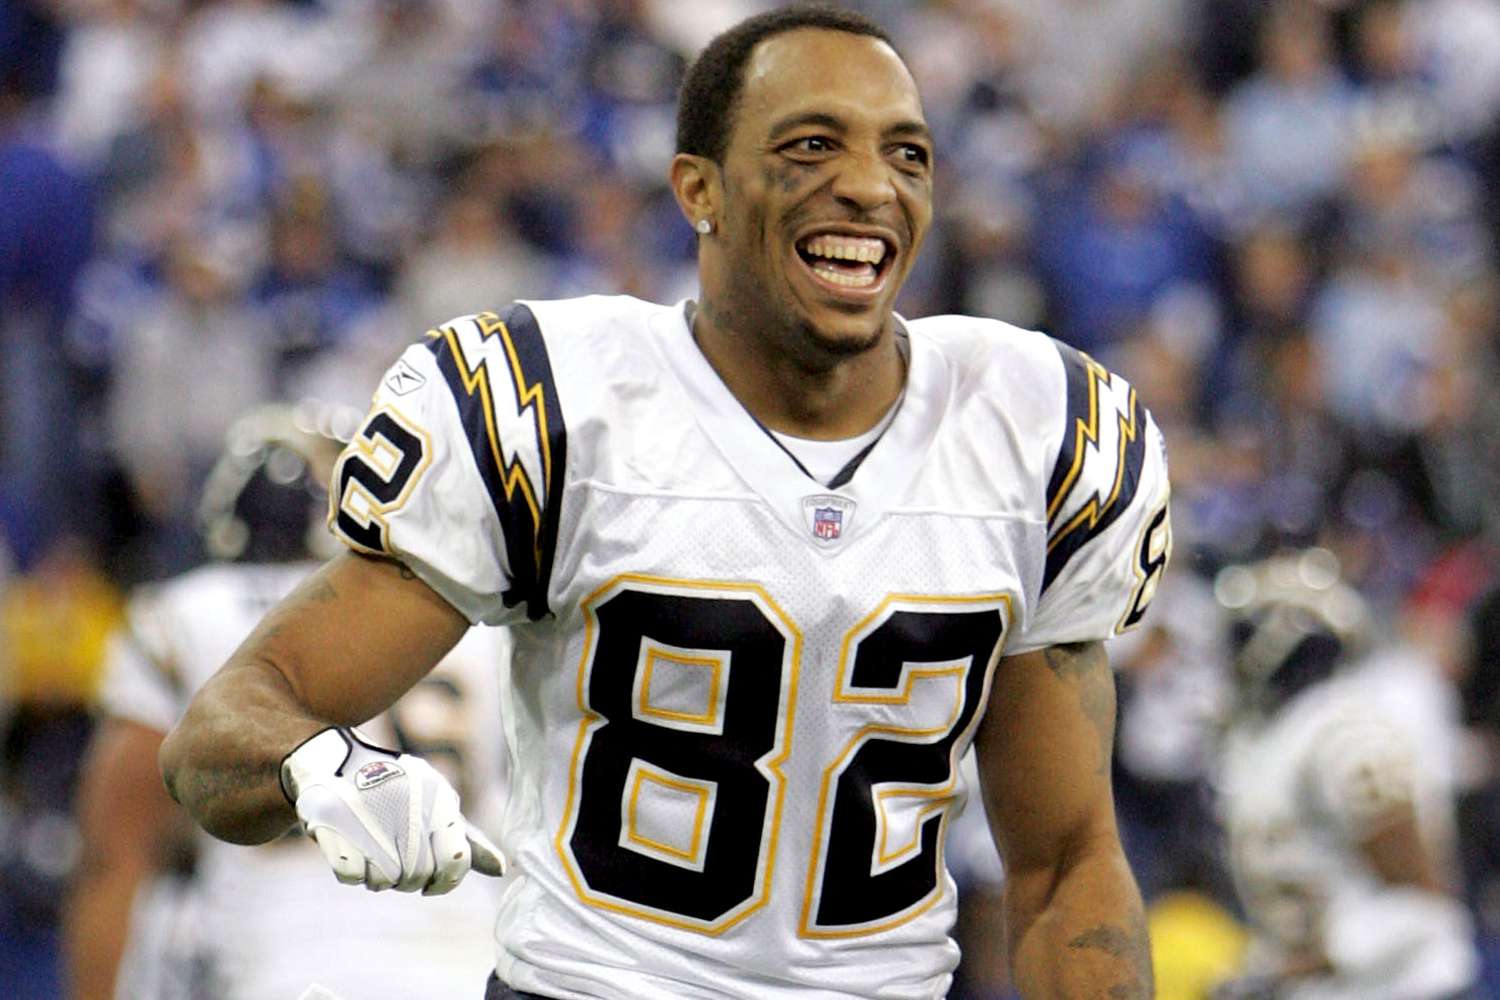 Former NFL Wide Receiver Reche Caldwell Shot and Killed | PEOPLE.com